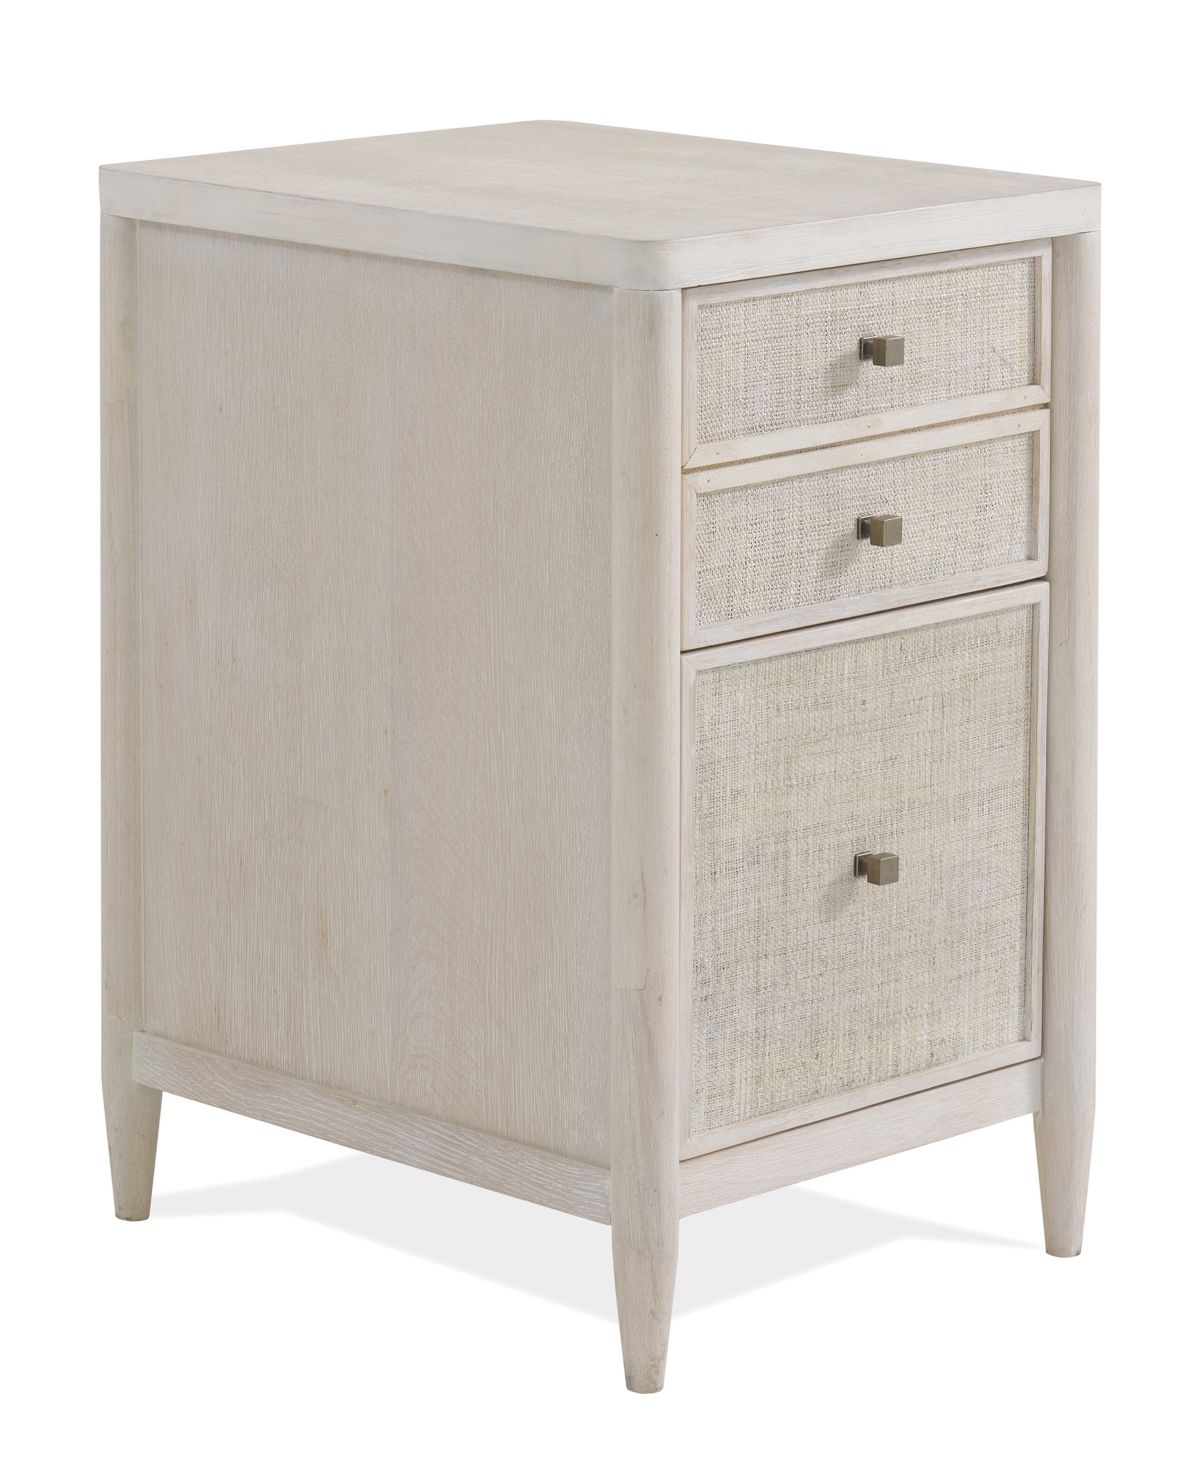 Furniture Maren 30" Wood Dovetail Joinery File Cabinet In White Sand